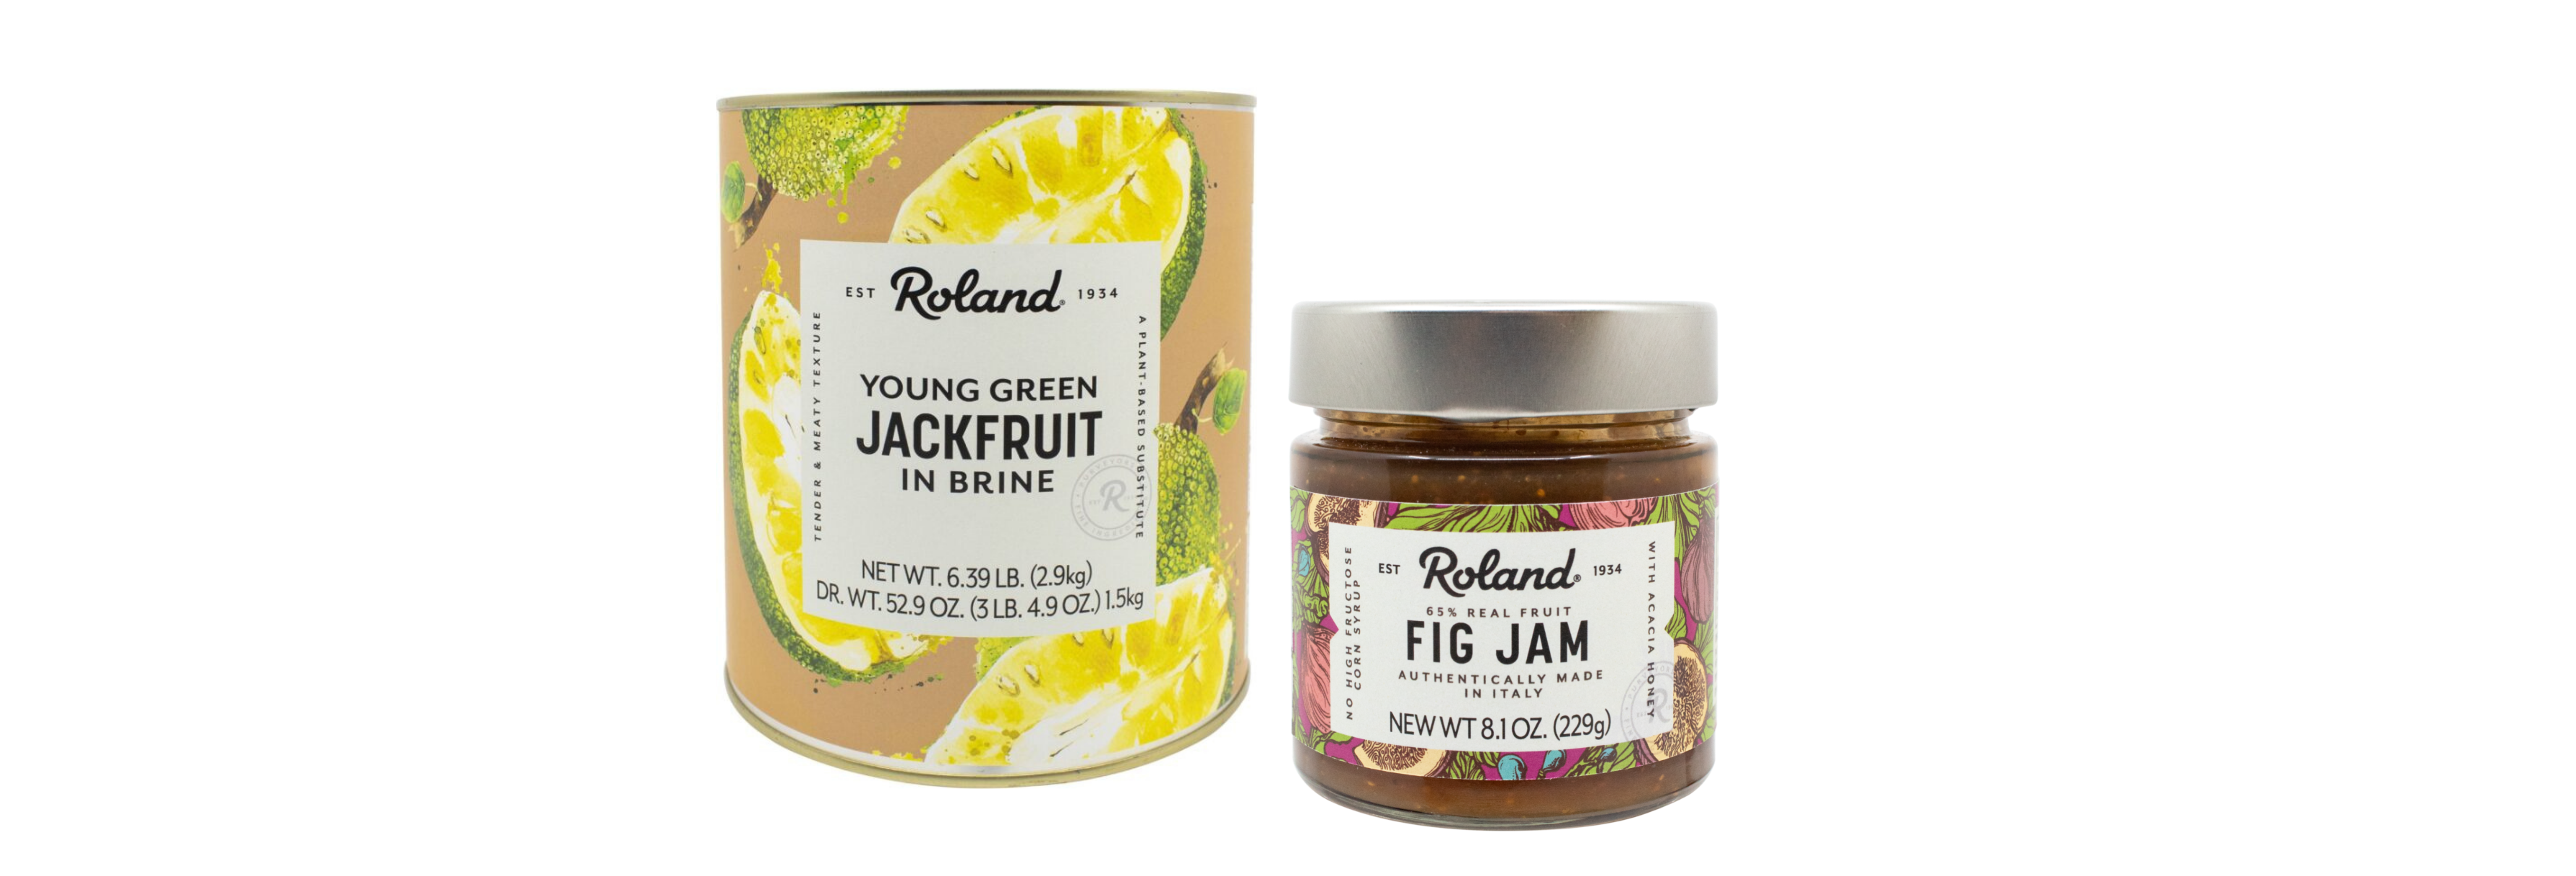 Roland Foods Brand Packaging